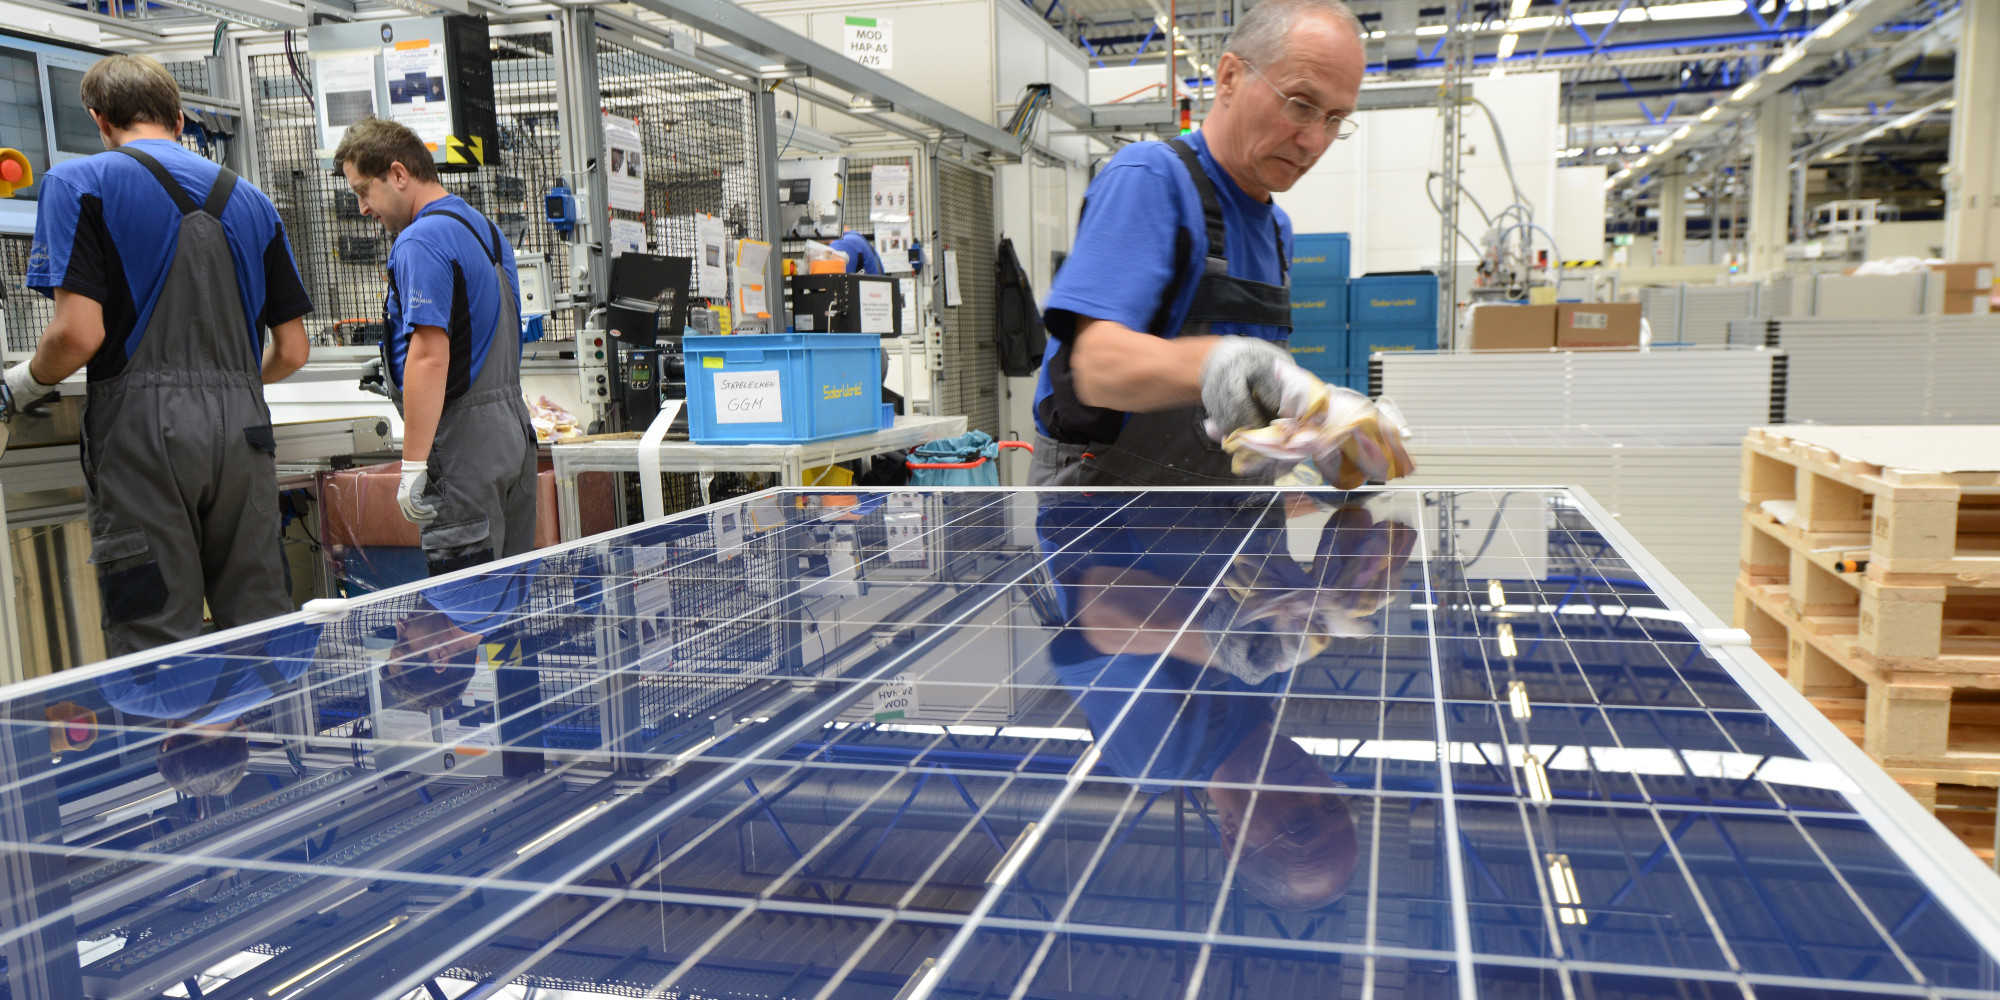 How to Choose Good Quality Panels for Solar Electricity